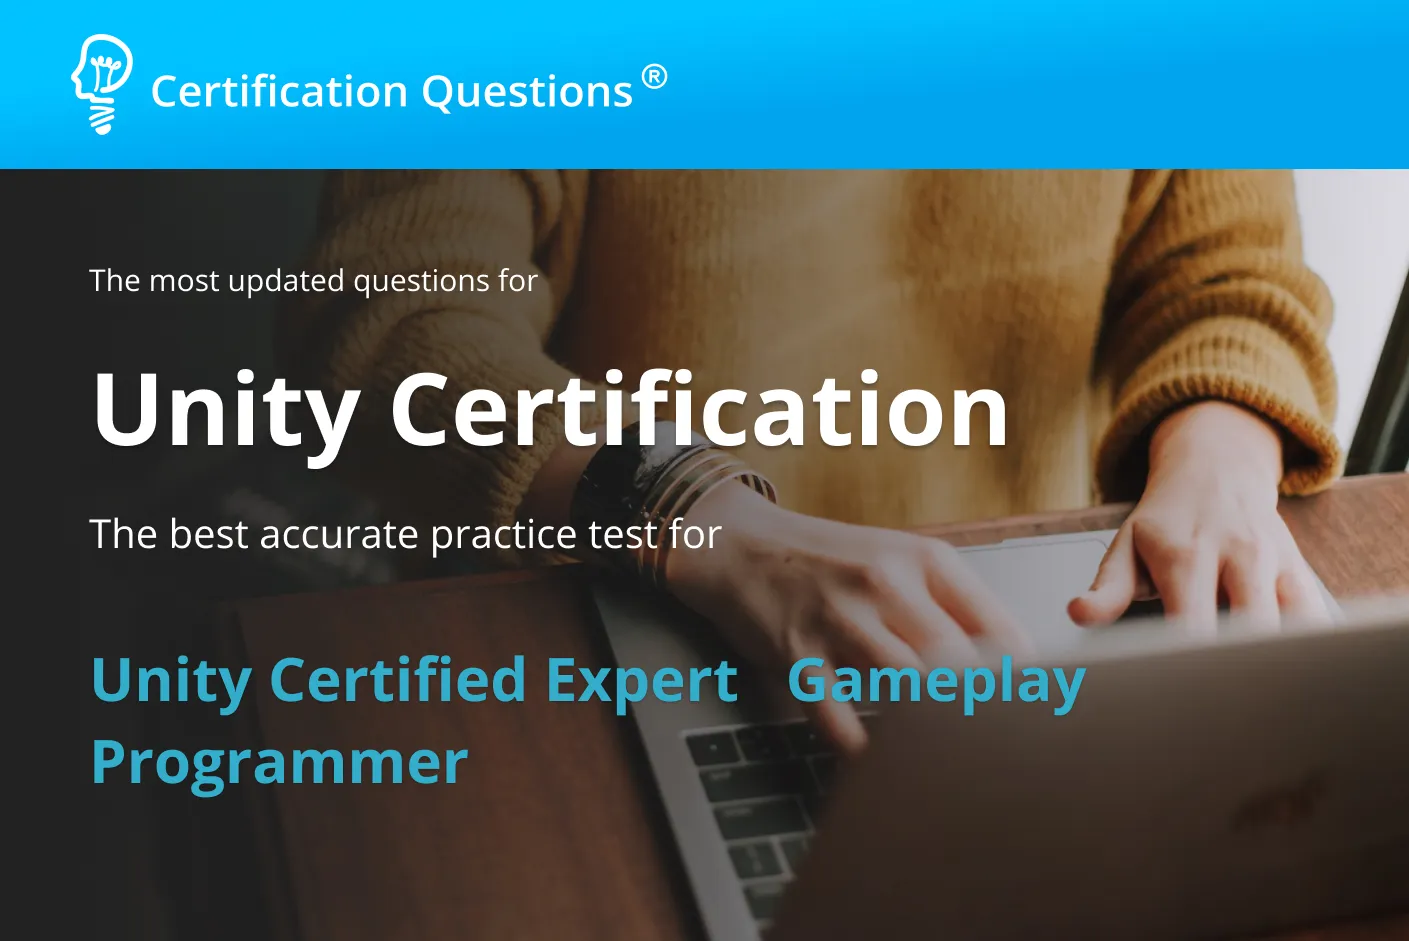 This image is related to unity certified programmer practice test